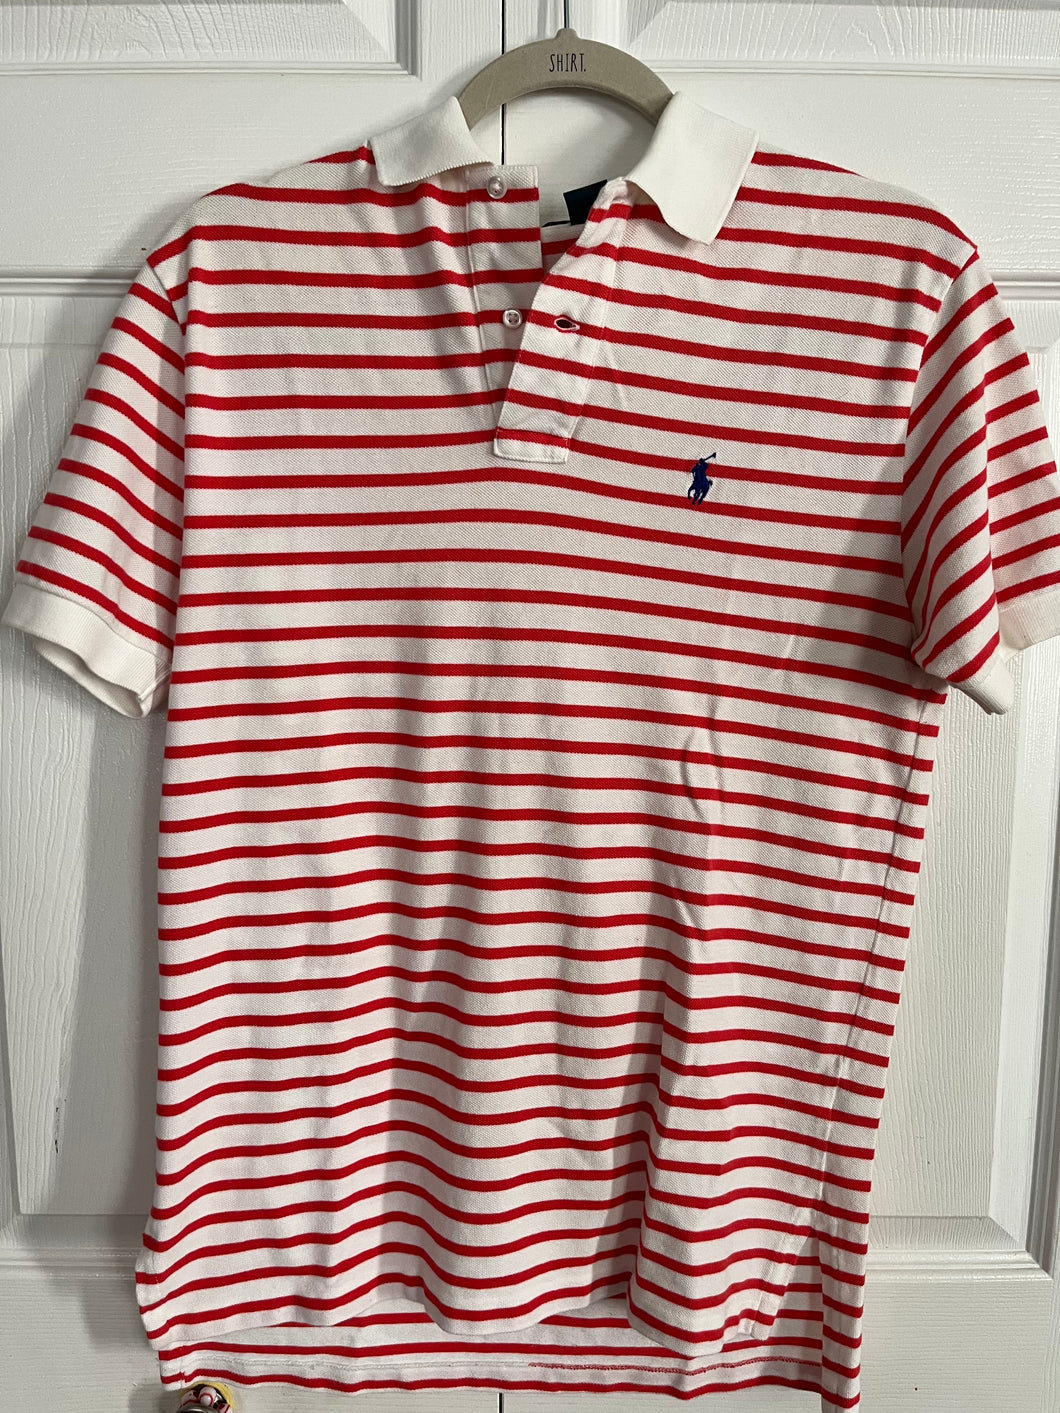 Ralph Lauren Polo shirt. Small size for men  Adult Small